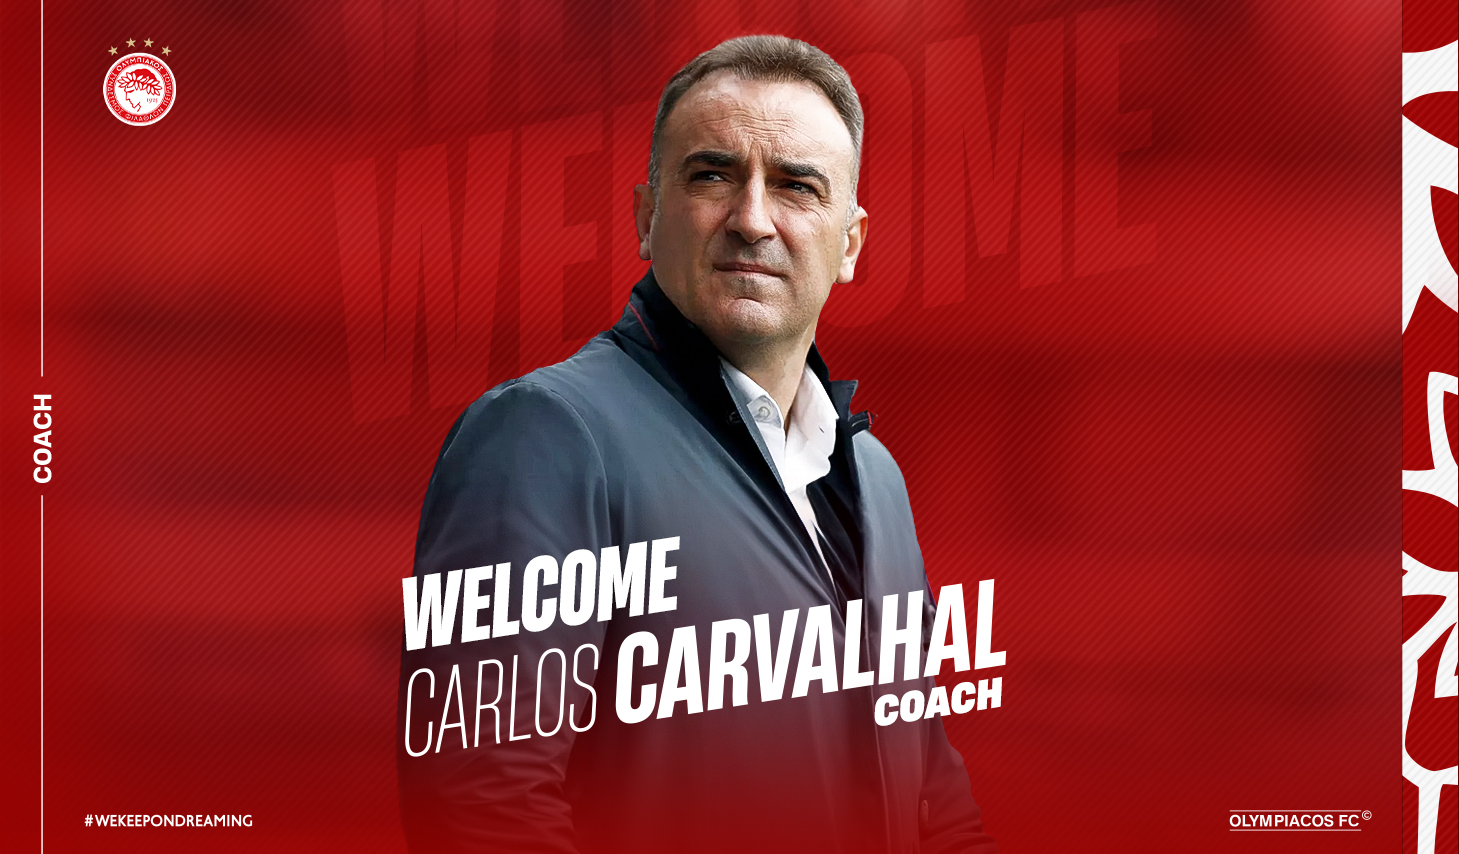 Carlos Carvalhal joins Olympiacos